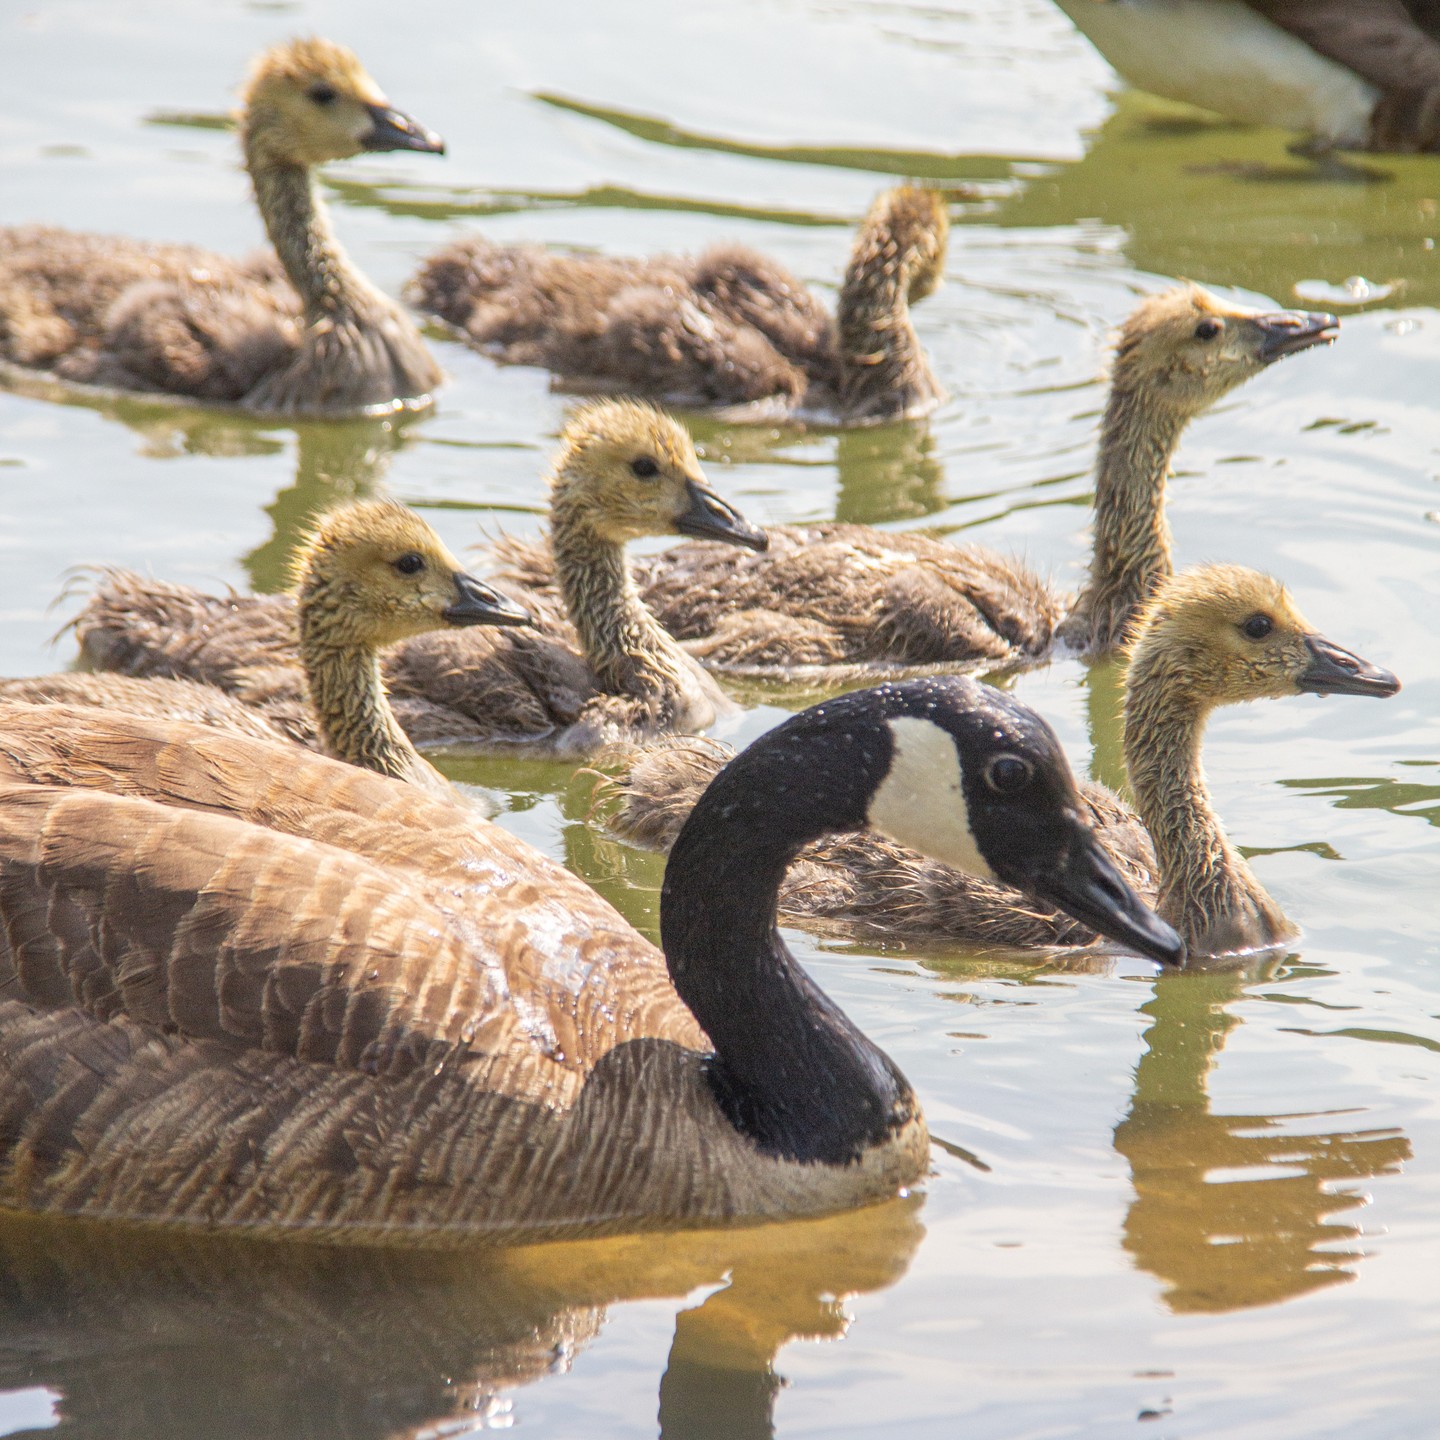 Mama goose and her goslings at East Lake Park in Chattanooga. 

#Goose #Geese #gosling #waterfowl #EastLakePark #Chattanooga #chattanoogapark #duckpond #birds